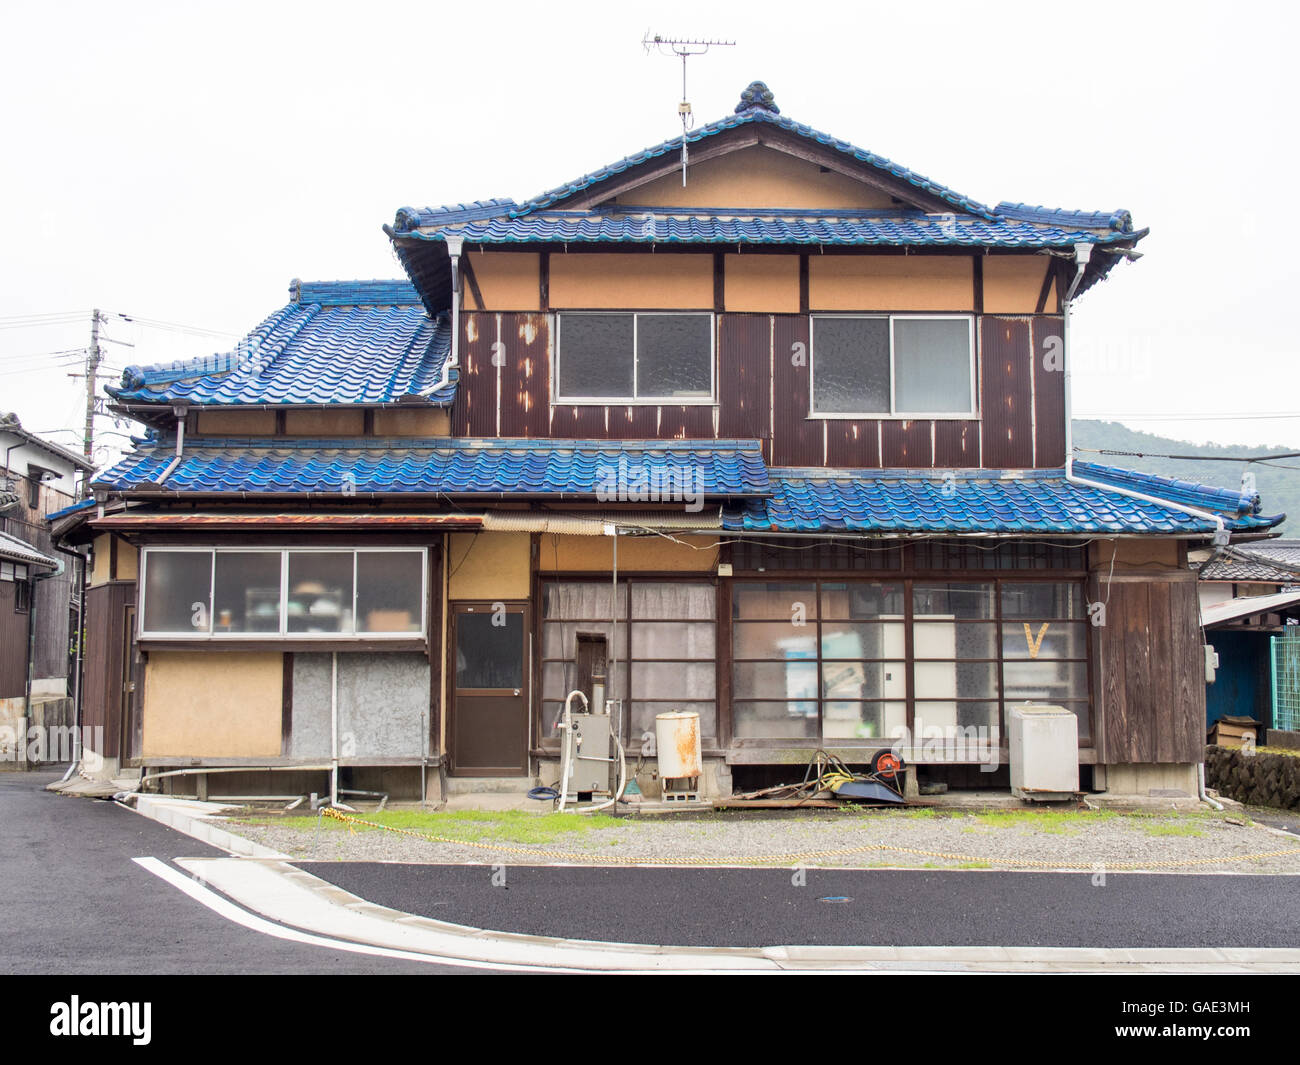 Traditional Japanese timber house with blue roof tiles. Stock Photo